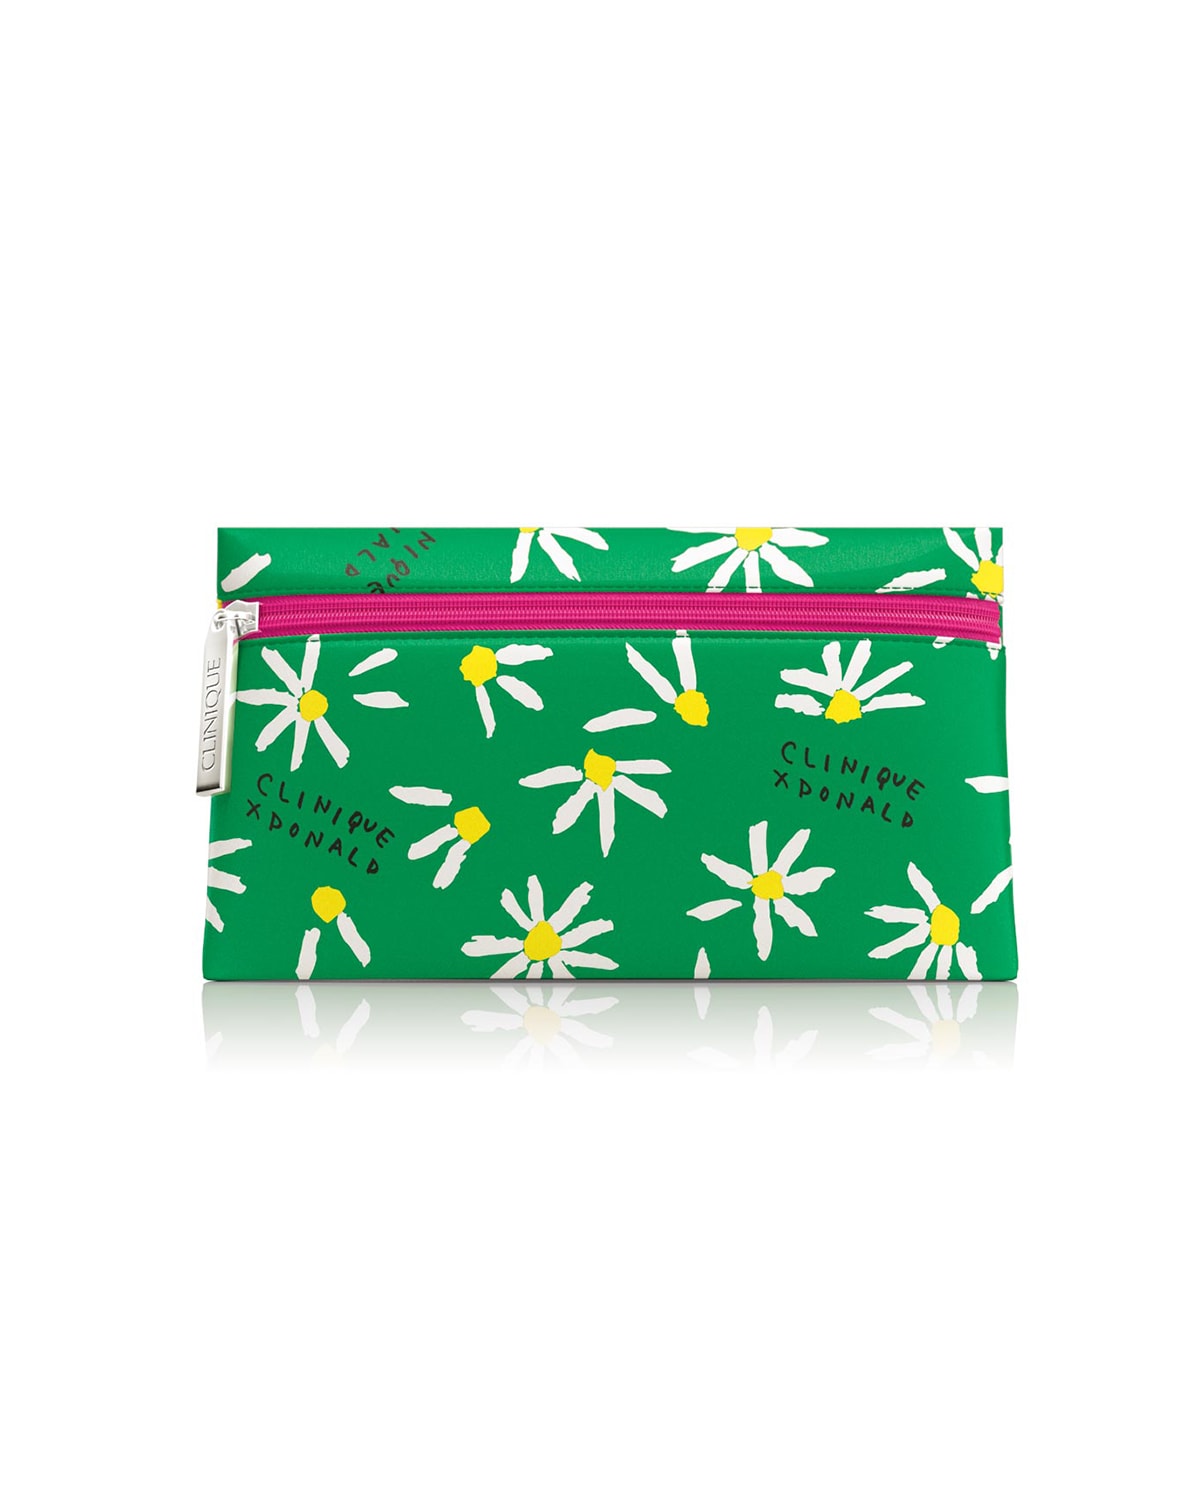 Clinique's Limited Edition Small Pouch